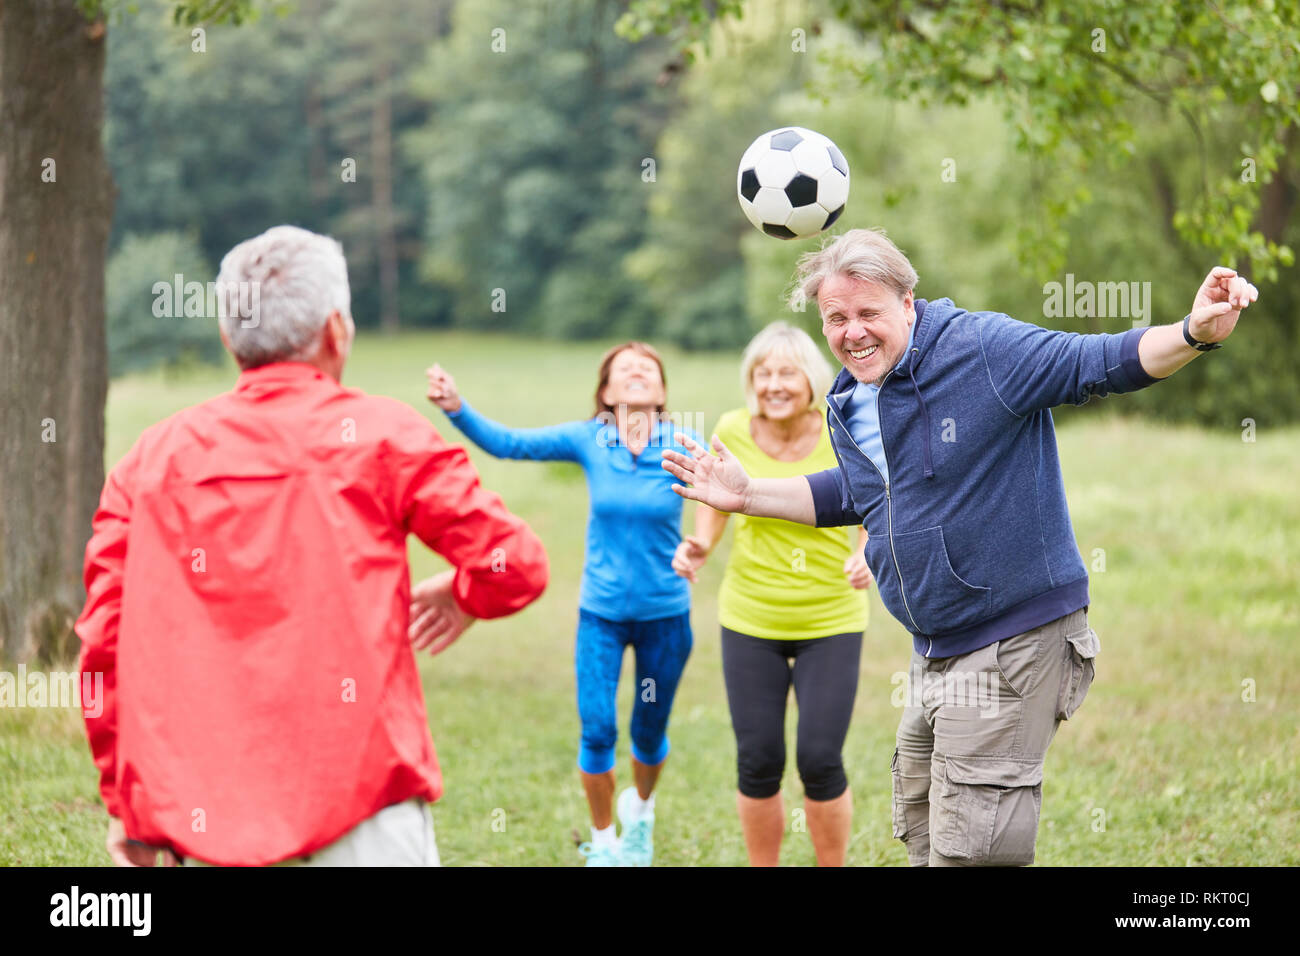 Senior man playing header in a soccer game together with friends Stock Photo